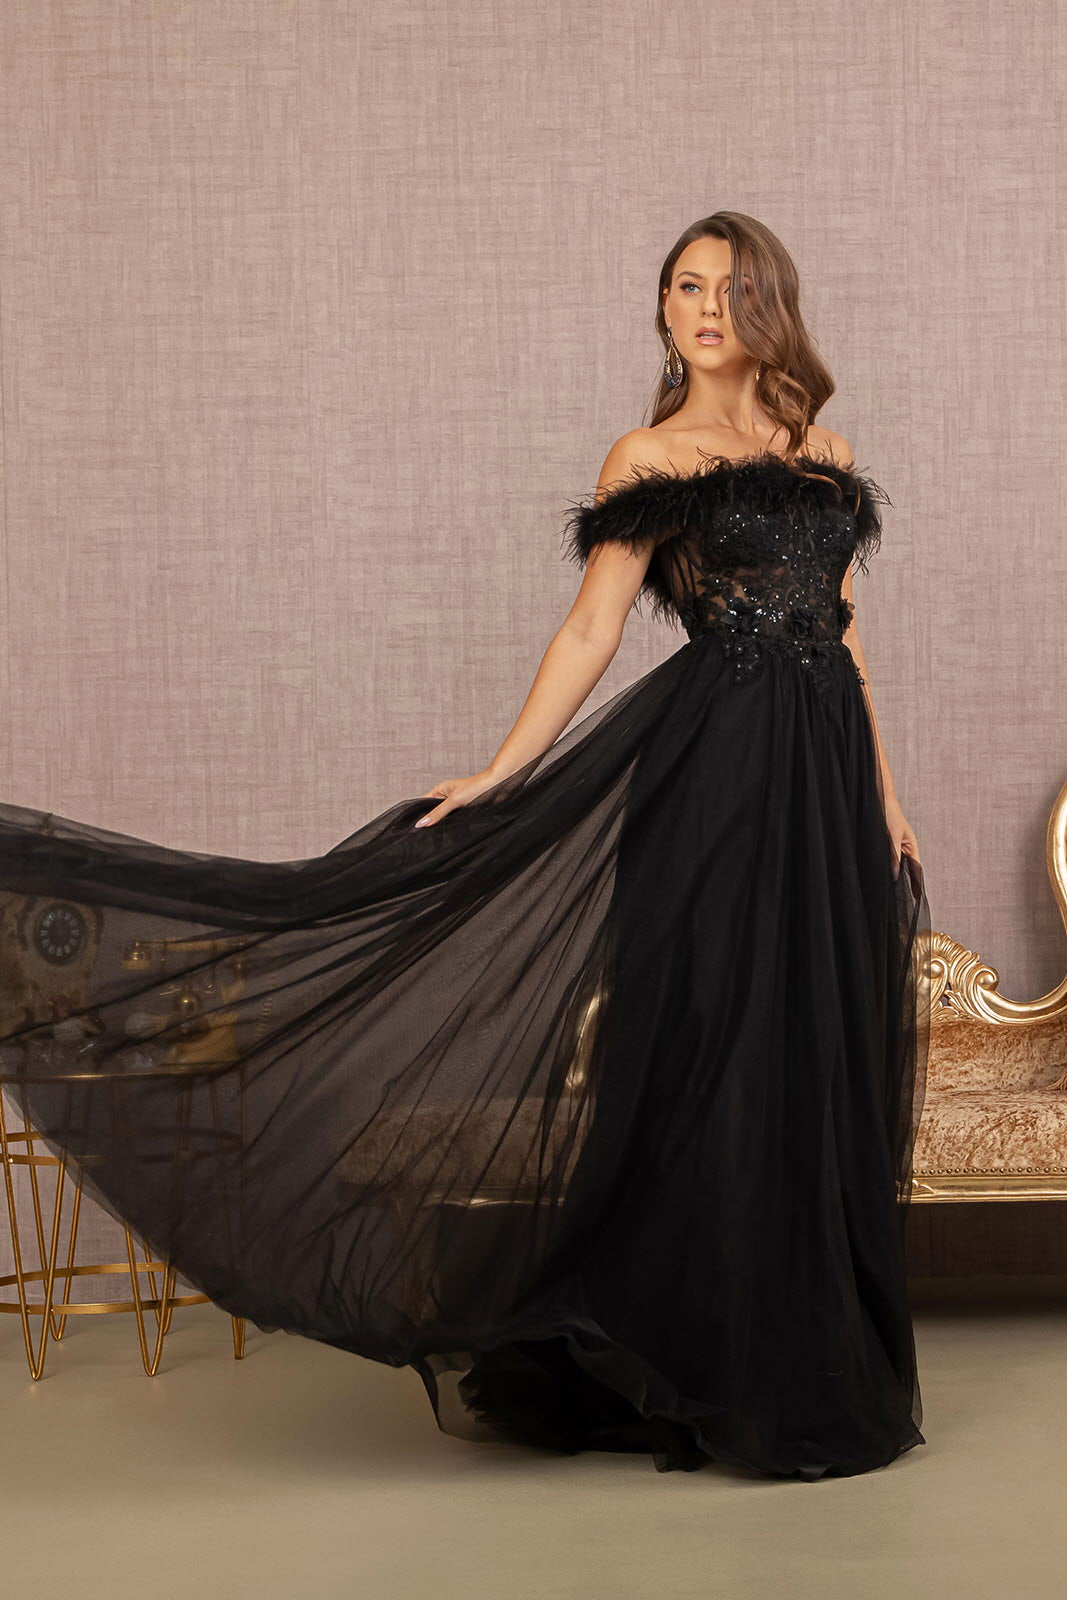 Embroidery Sheer Front Mesh A-line Dress Feather Embellishment GLGL3138-PROM-smcfashion.com